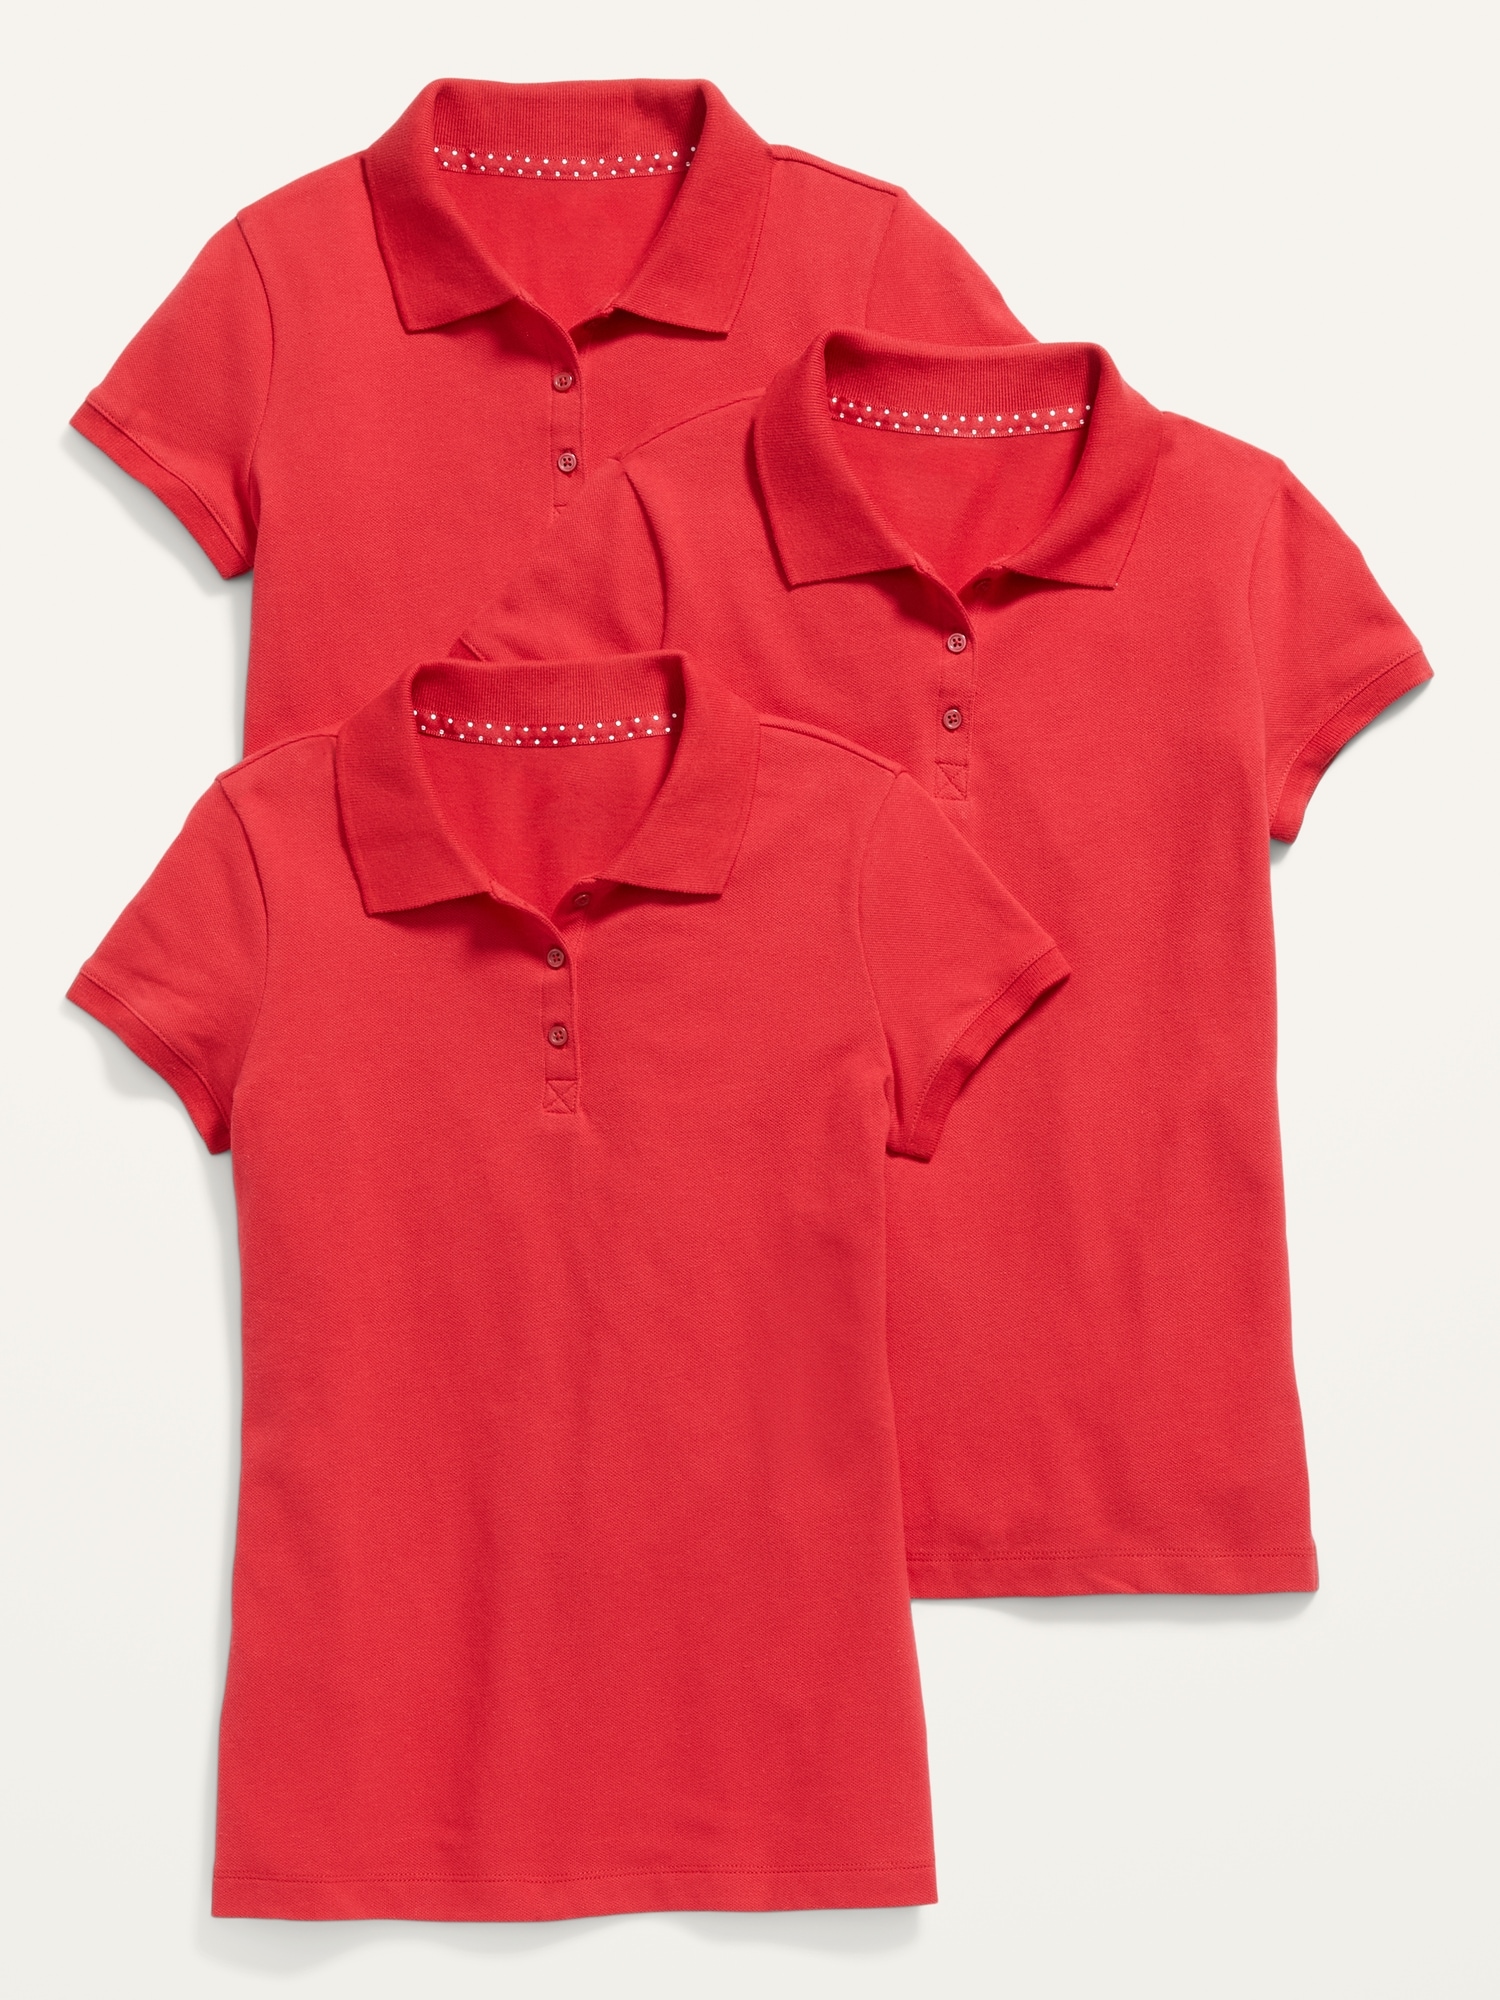 Old Navy Uniform Pique Polo Shirt 3-Pack for Girls red. 1